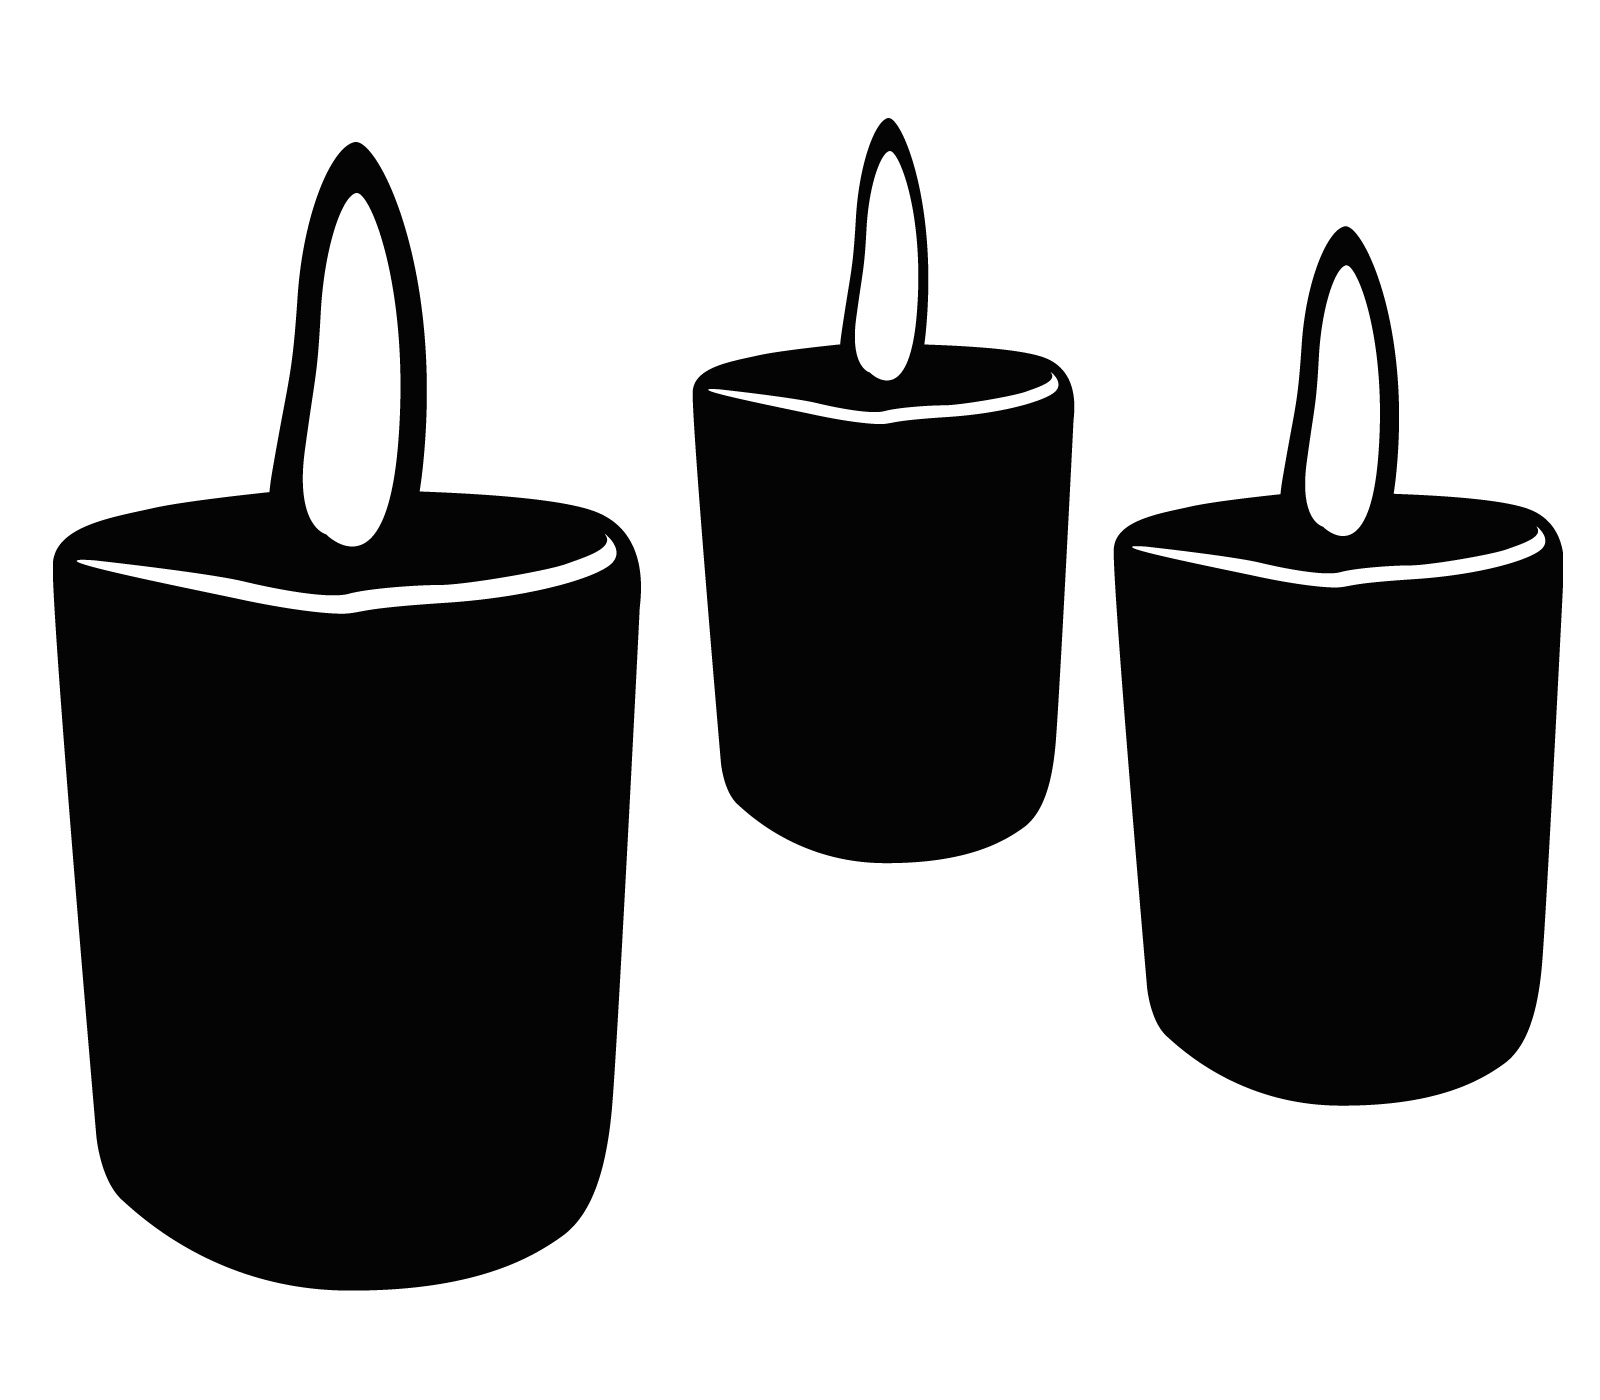 Candle taper clipart free clipart images image